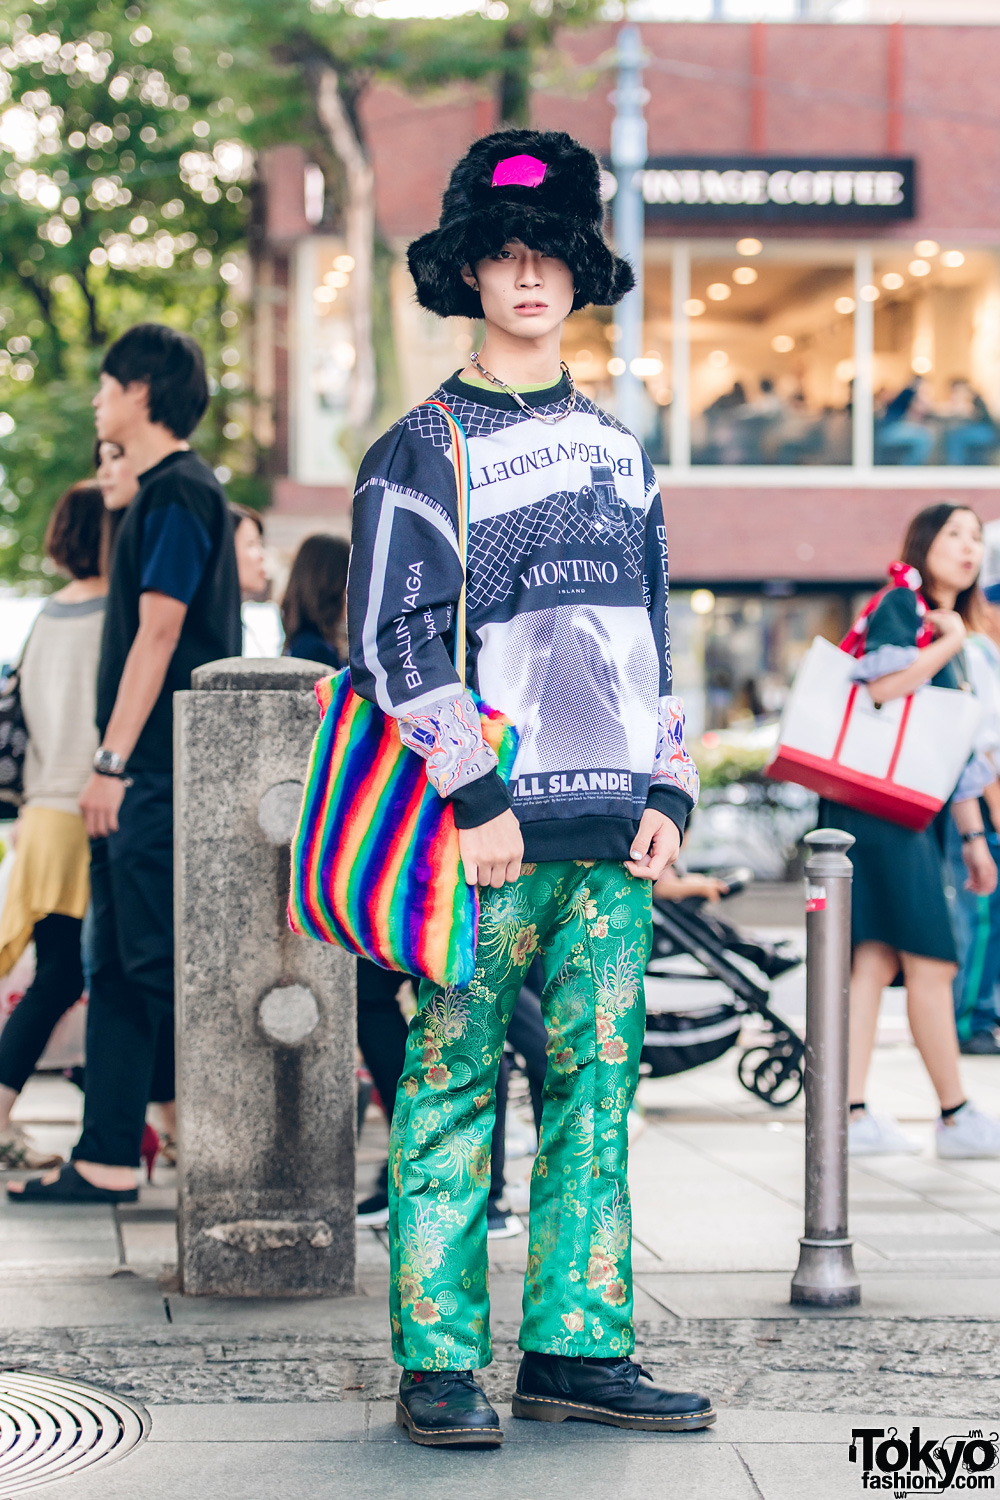 Harajuku Guy in Faux Fur Hat, Graphic Top, Floral Pants, & Rainbow ...